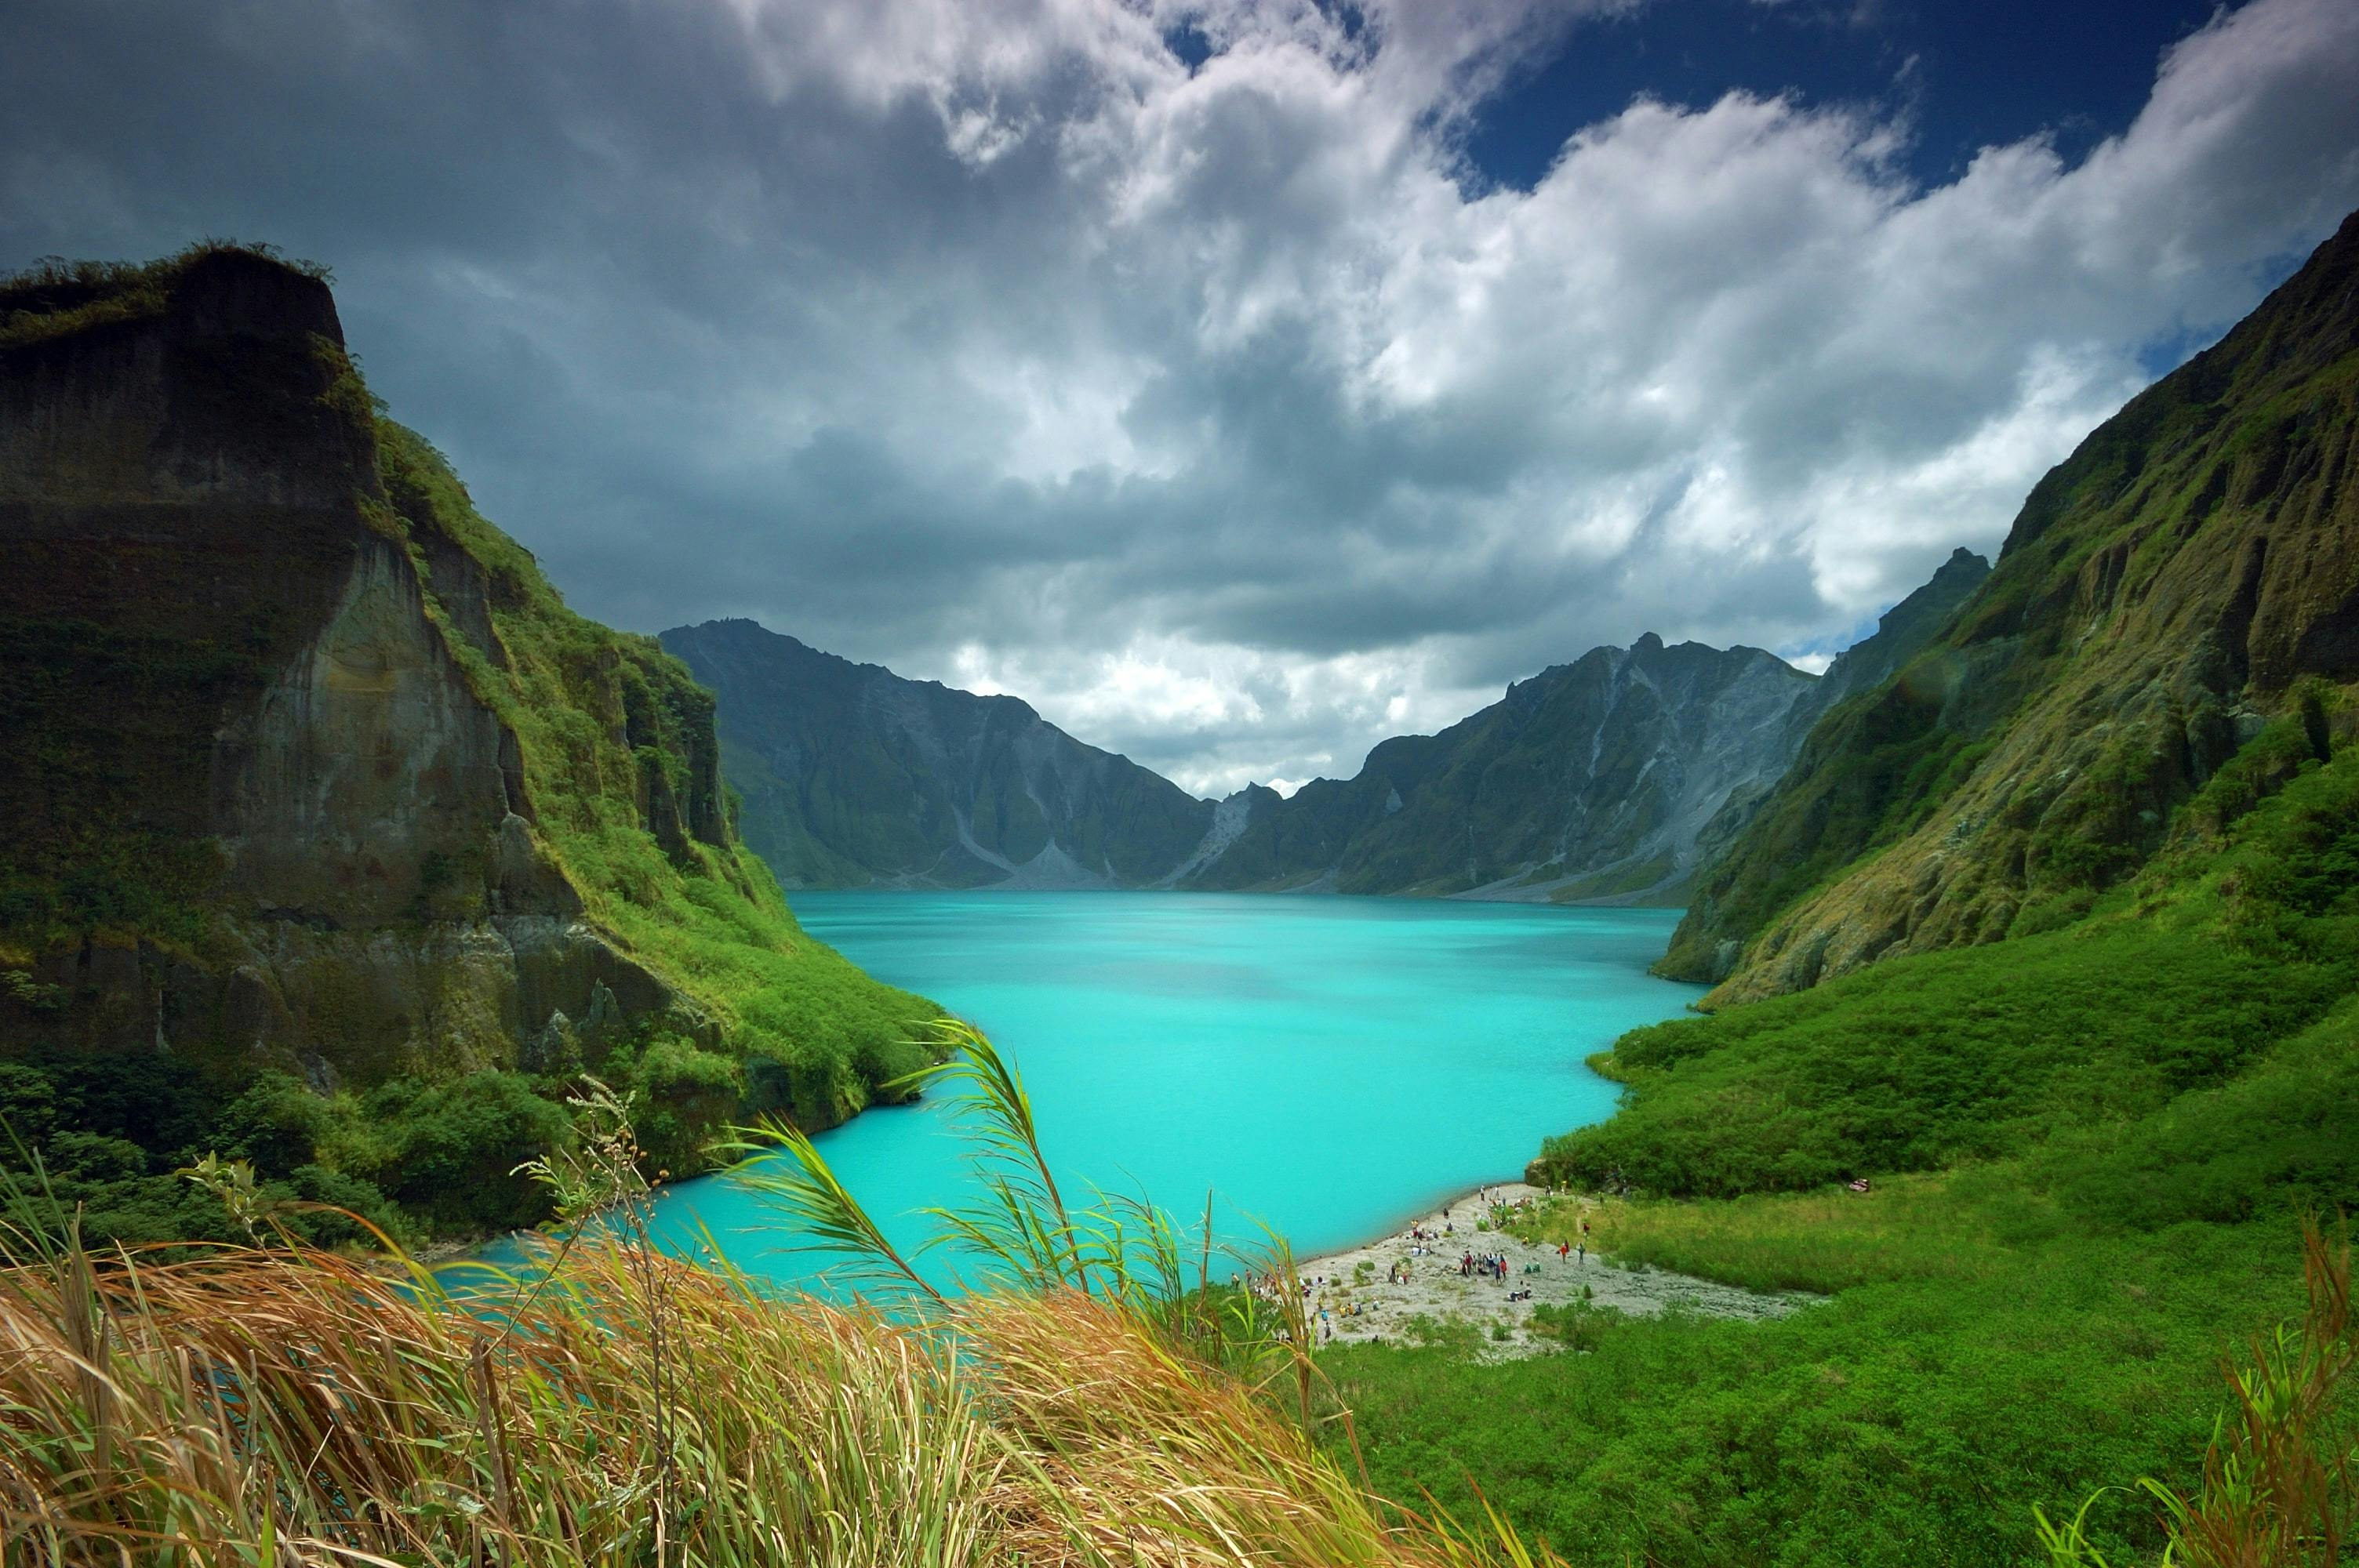 Popular view of the Mt. Pinatubo Crater Lake in Tarlac